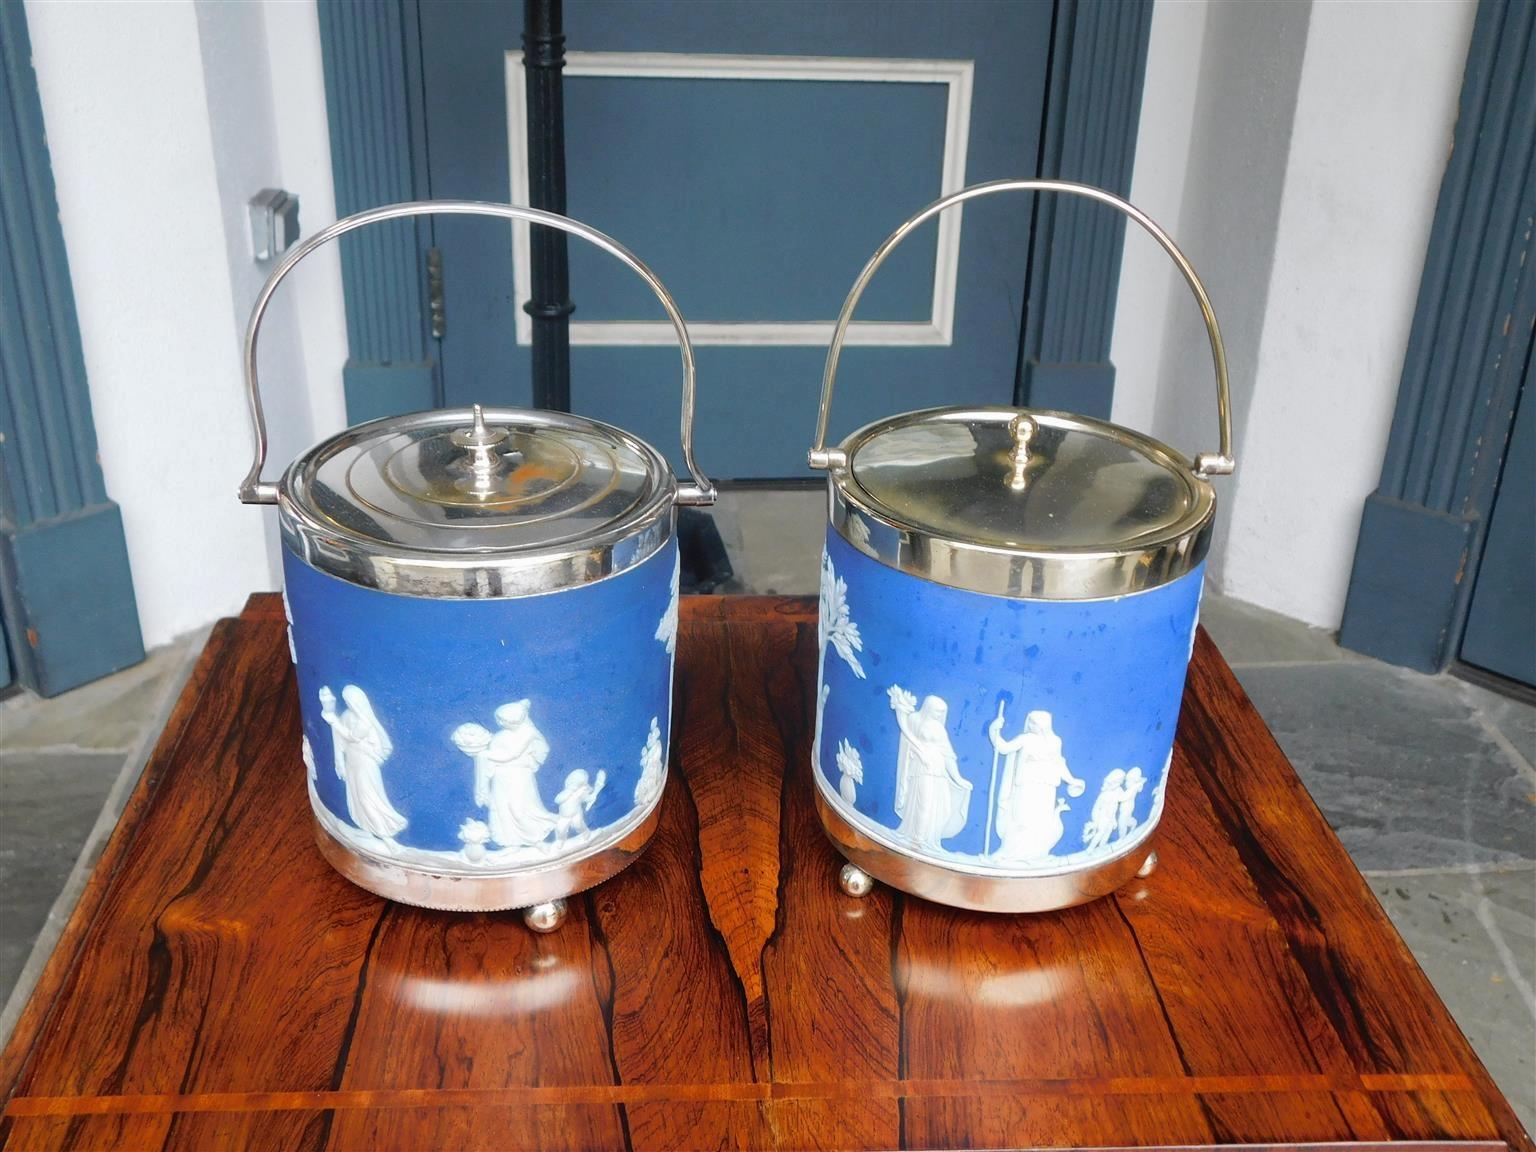 Pair of English Wedgewood figural and foliage silver plate biscuit barrels with original folding handles and removable lids. 19th Century.